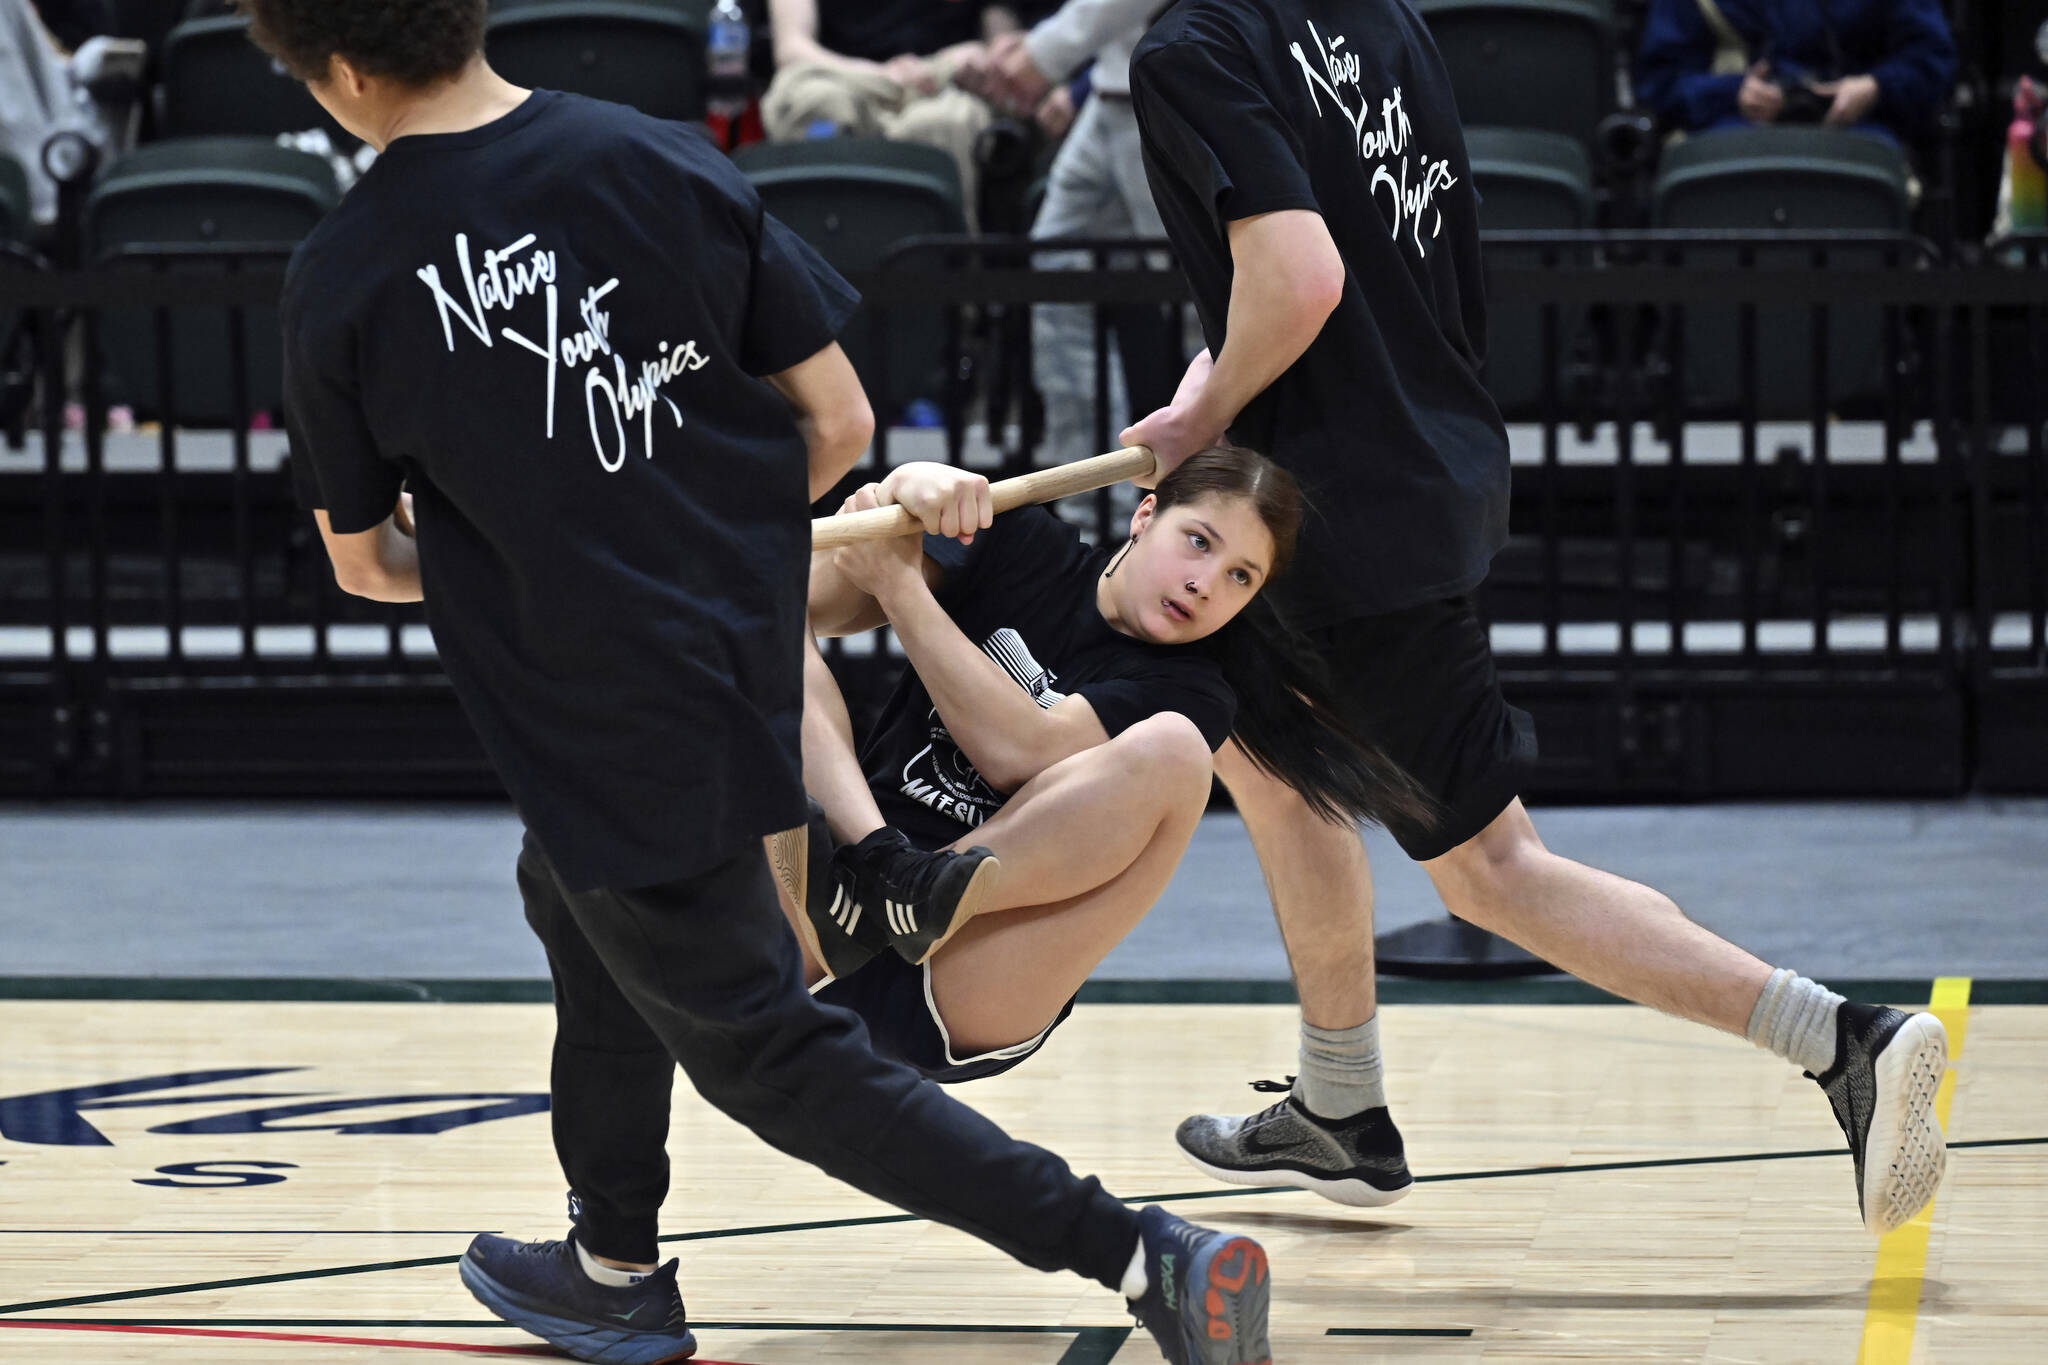 Eulalia Roman, 12, with team Mat-Su competes in the wrist carry on the first day of the Native Youth Olympics Senior Games at the Alaska Airlines Center on Thursday in Anchorage. (Bill Roth/Anchorage Daily News via AP)